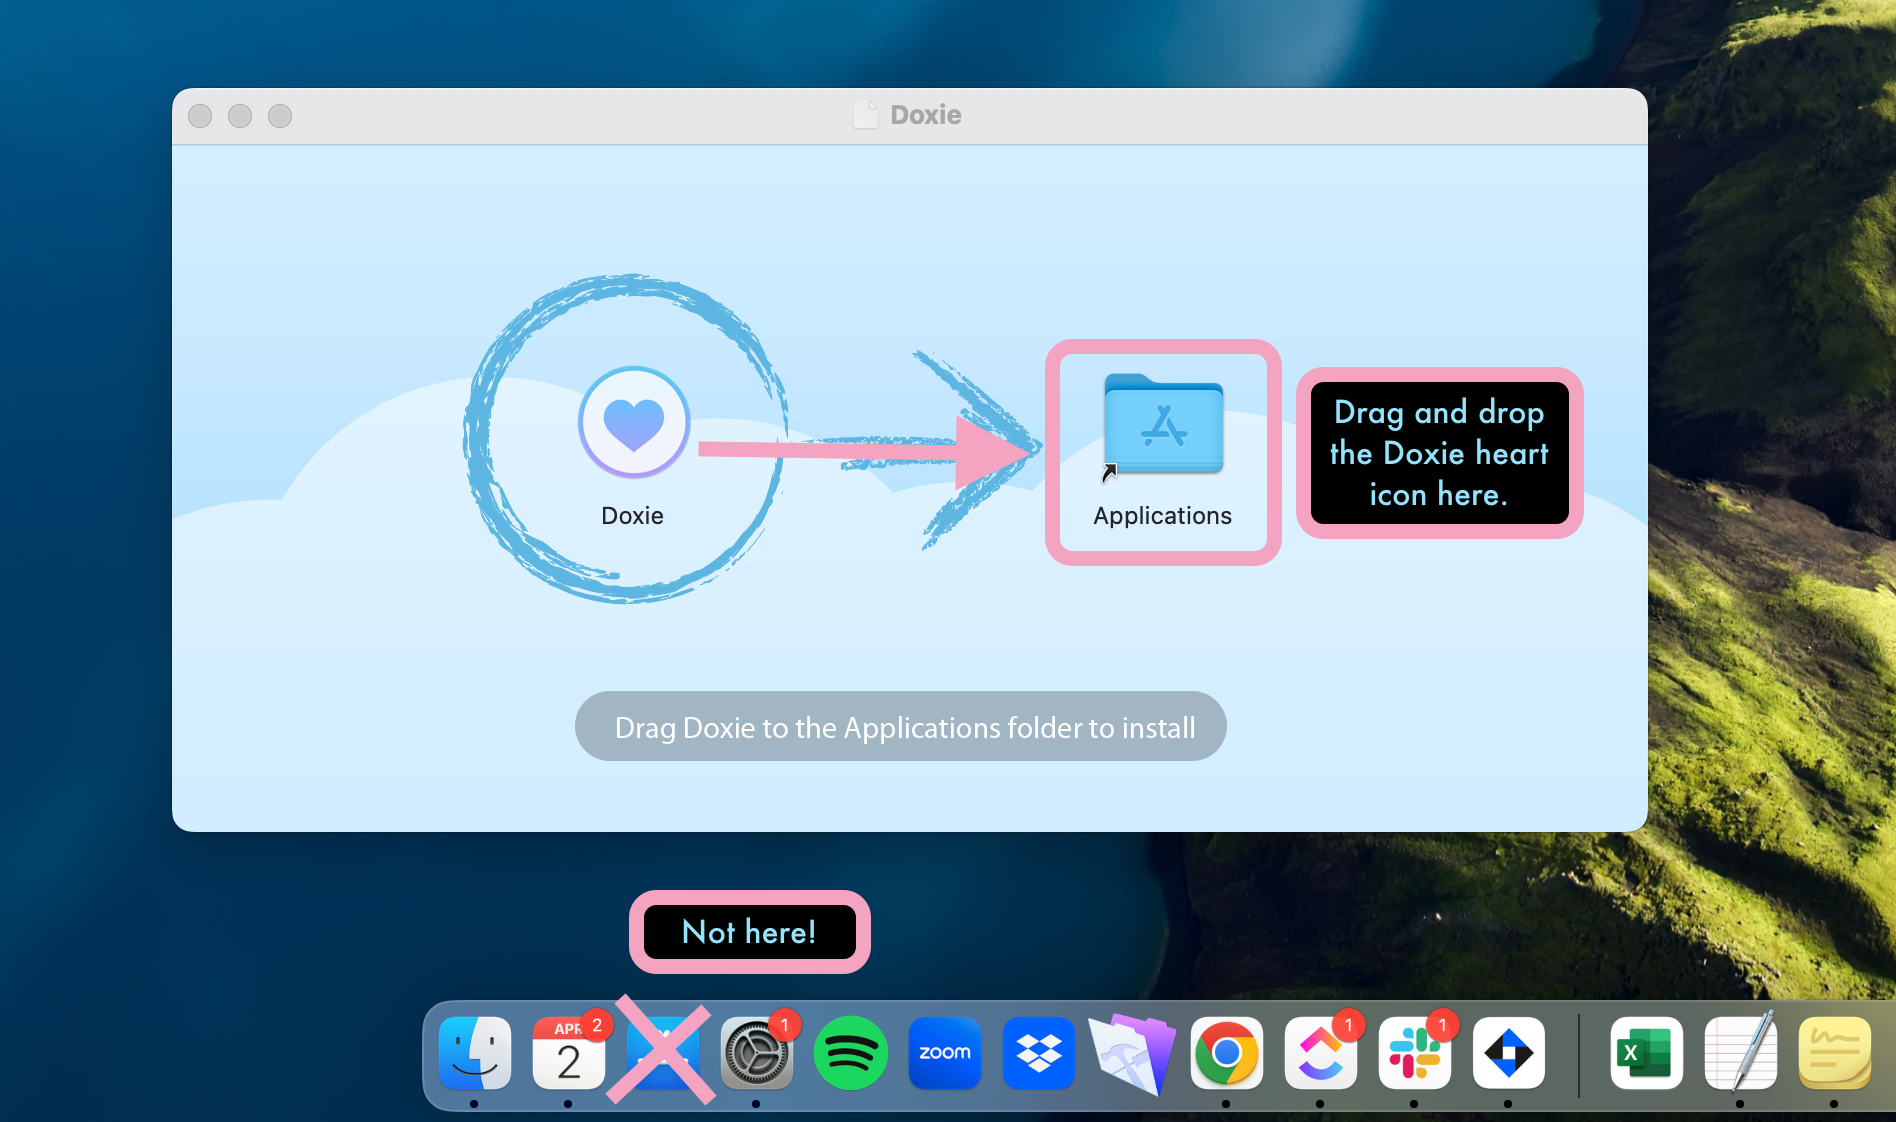 A light blue window with a white heart icon on the left and a blue folder icon on the right. The folder is labeled Applications in black text. A pink arrow is pointing from the heart icon to the Applications folder. An additional text box instructs the user to drag and drop the heart icon into the Applications folder in the light blue window, not to the applications icon in the bottom tool bar.